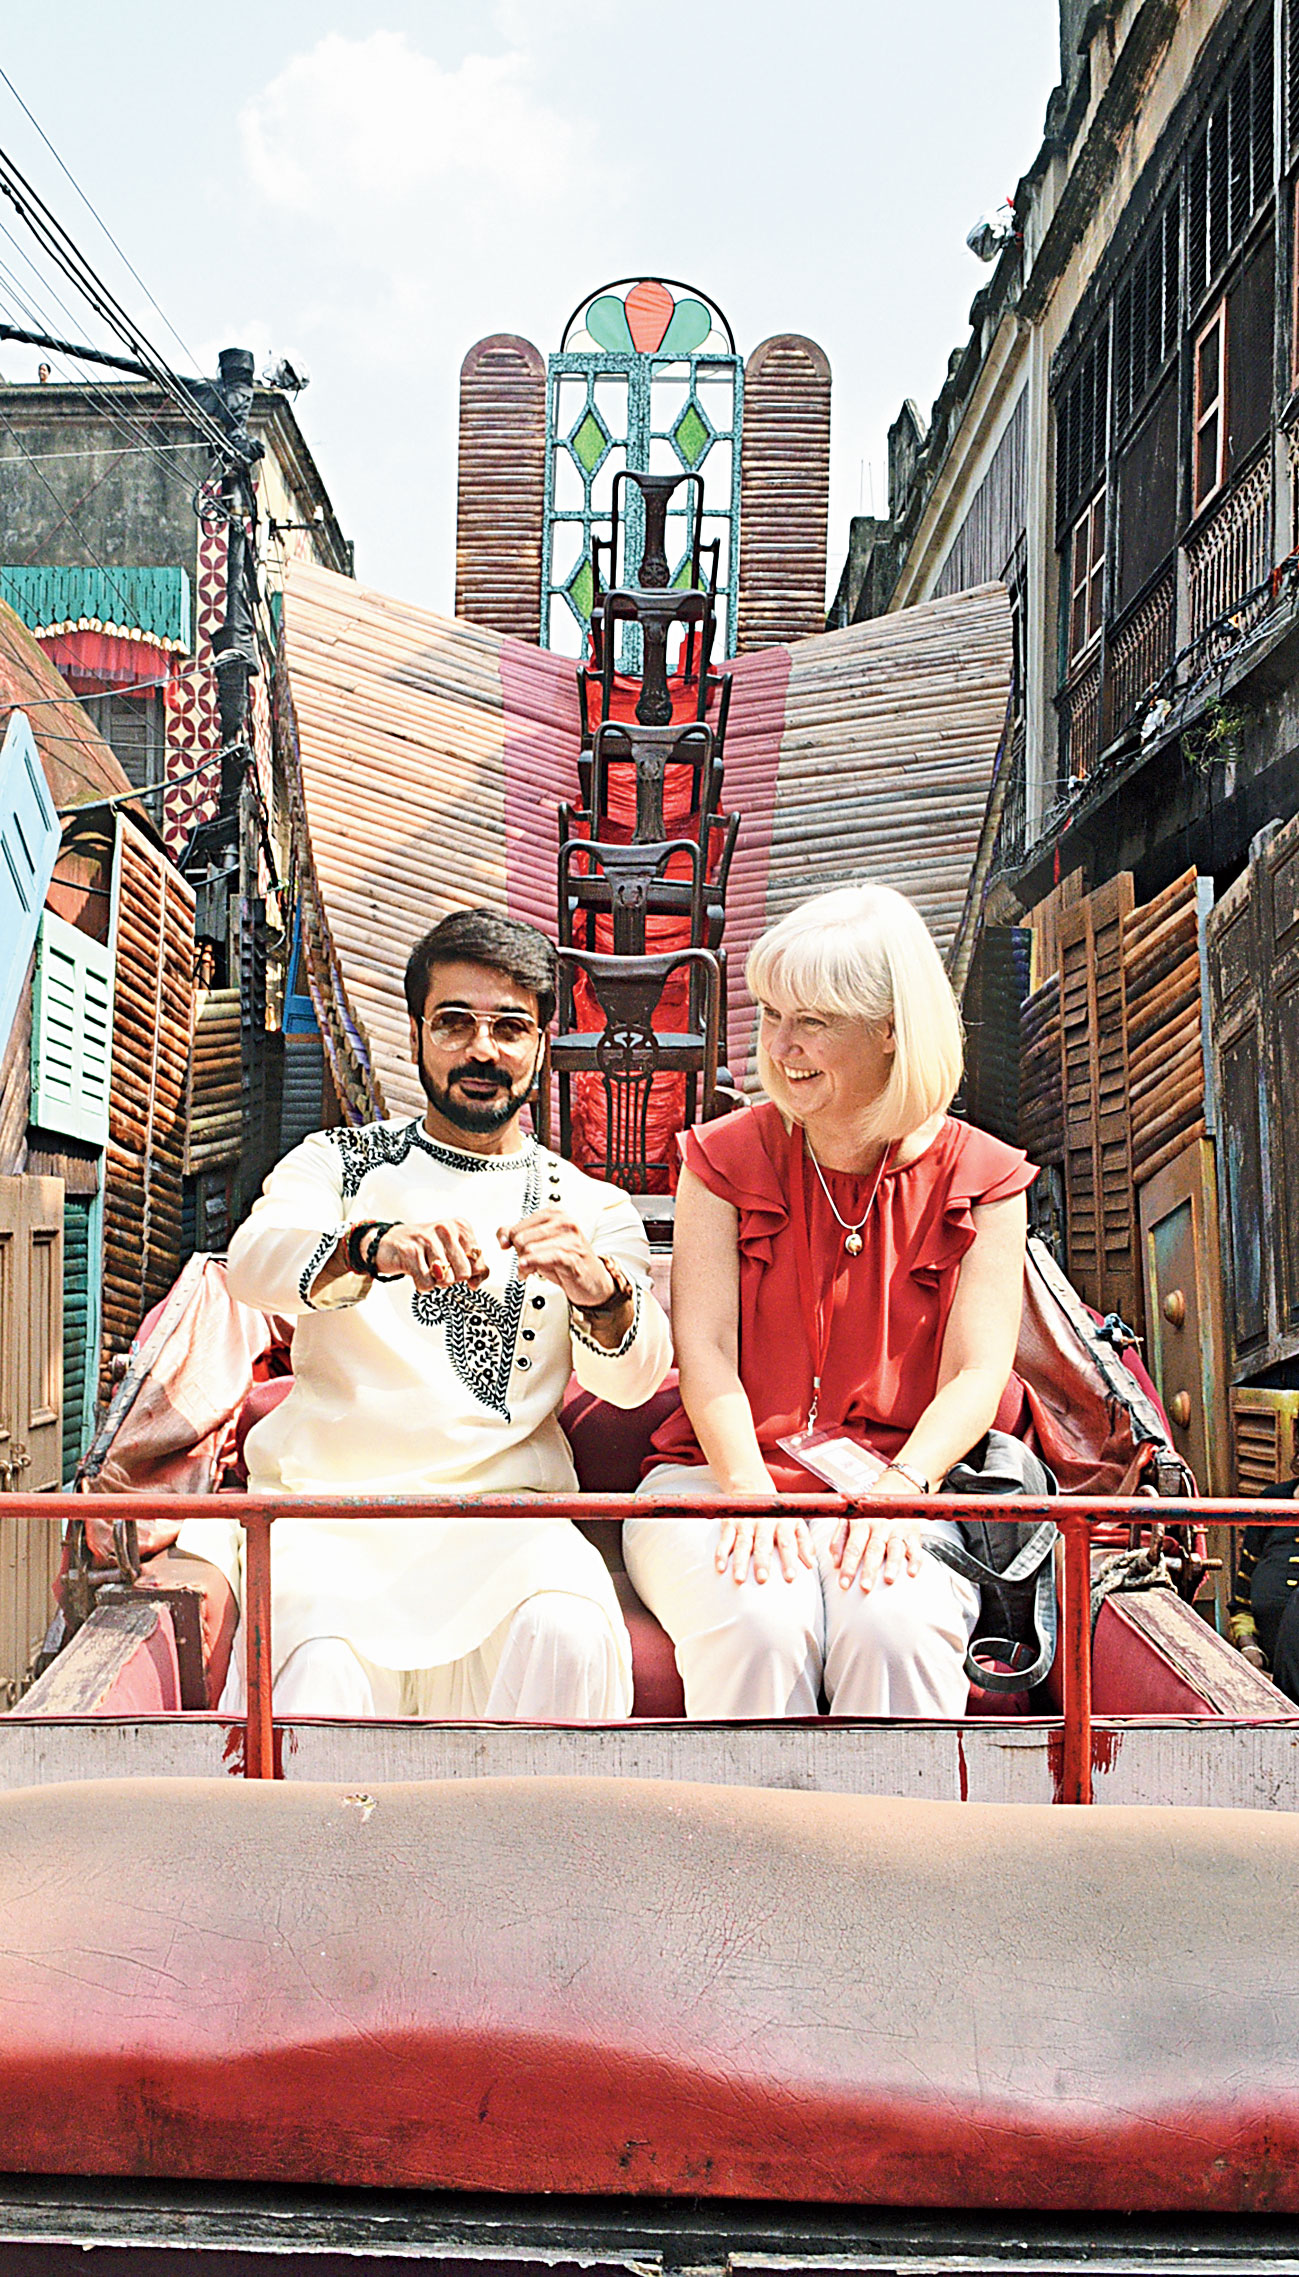 Tolly star Prosenjit and US consul general Patti Hoffman ride a hand-drawn carriage that welcomes visitors to Sikdar Bagan Sadharan Durgotsav, the Model Puja for CESC The Telegraph True Spirit Puja 2018, powered by Patanjali